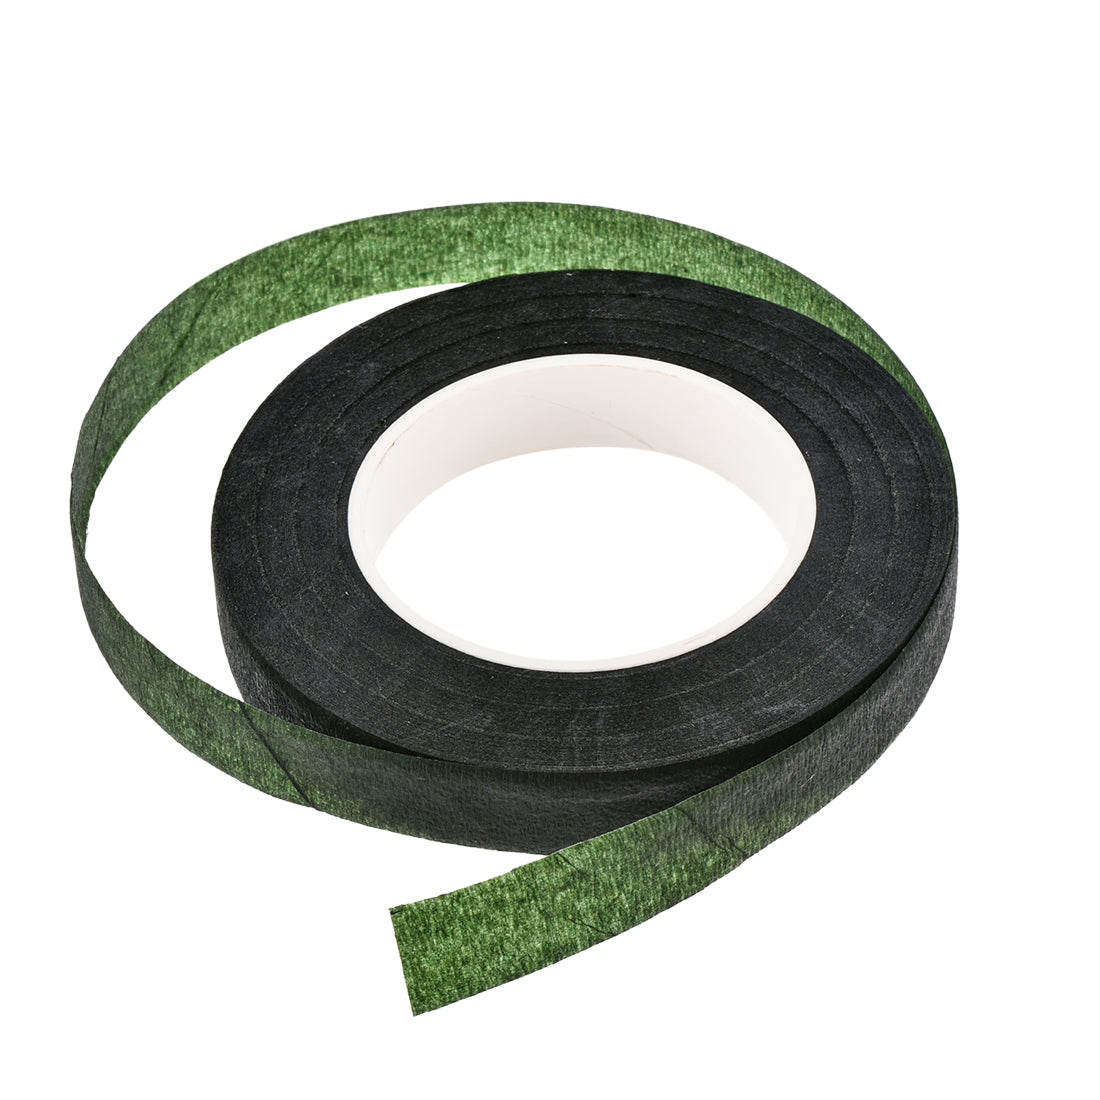 uxcell Uxcell 1/2"x30Yard Dark Green Floral Tape Flower Adhesives Floral Arrangement Kit